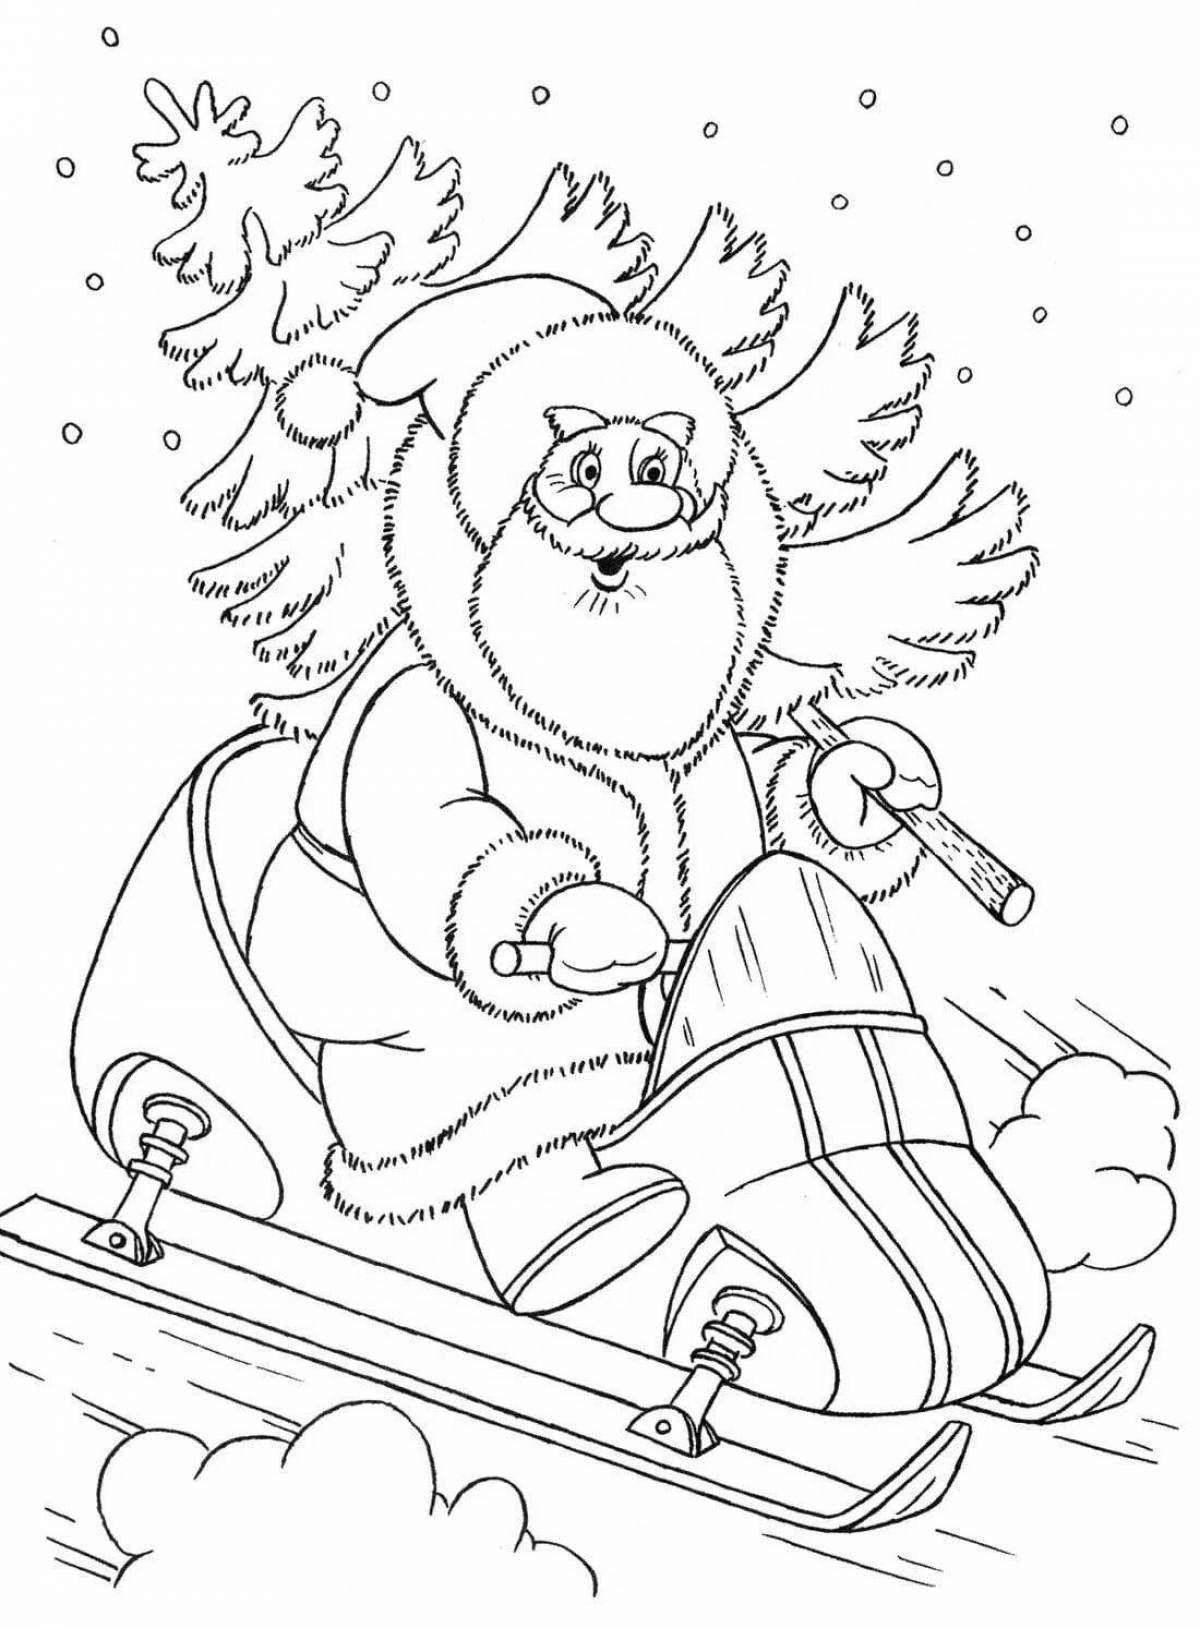 Animated santa claus on sleigh coloring book